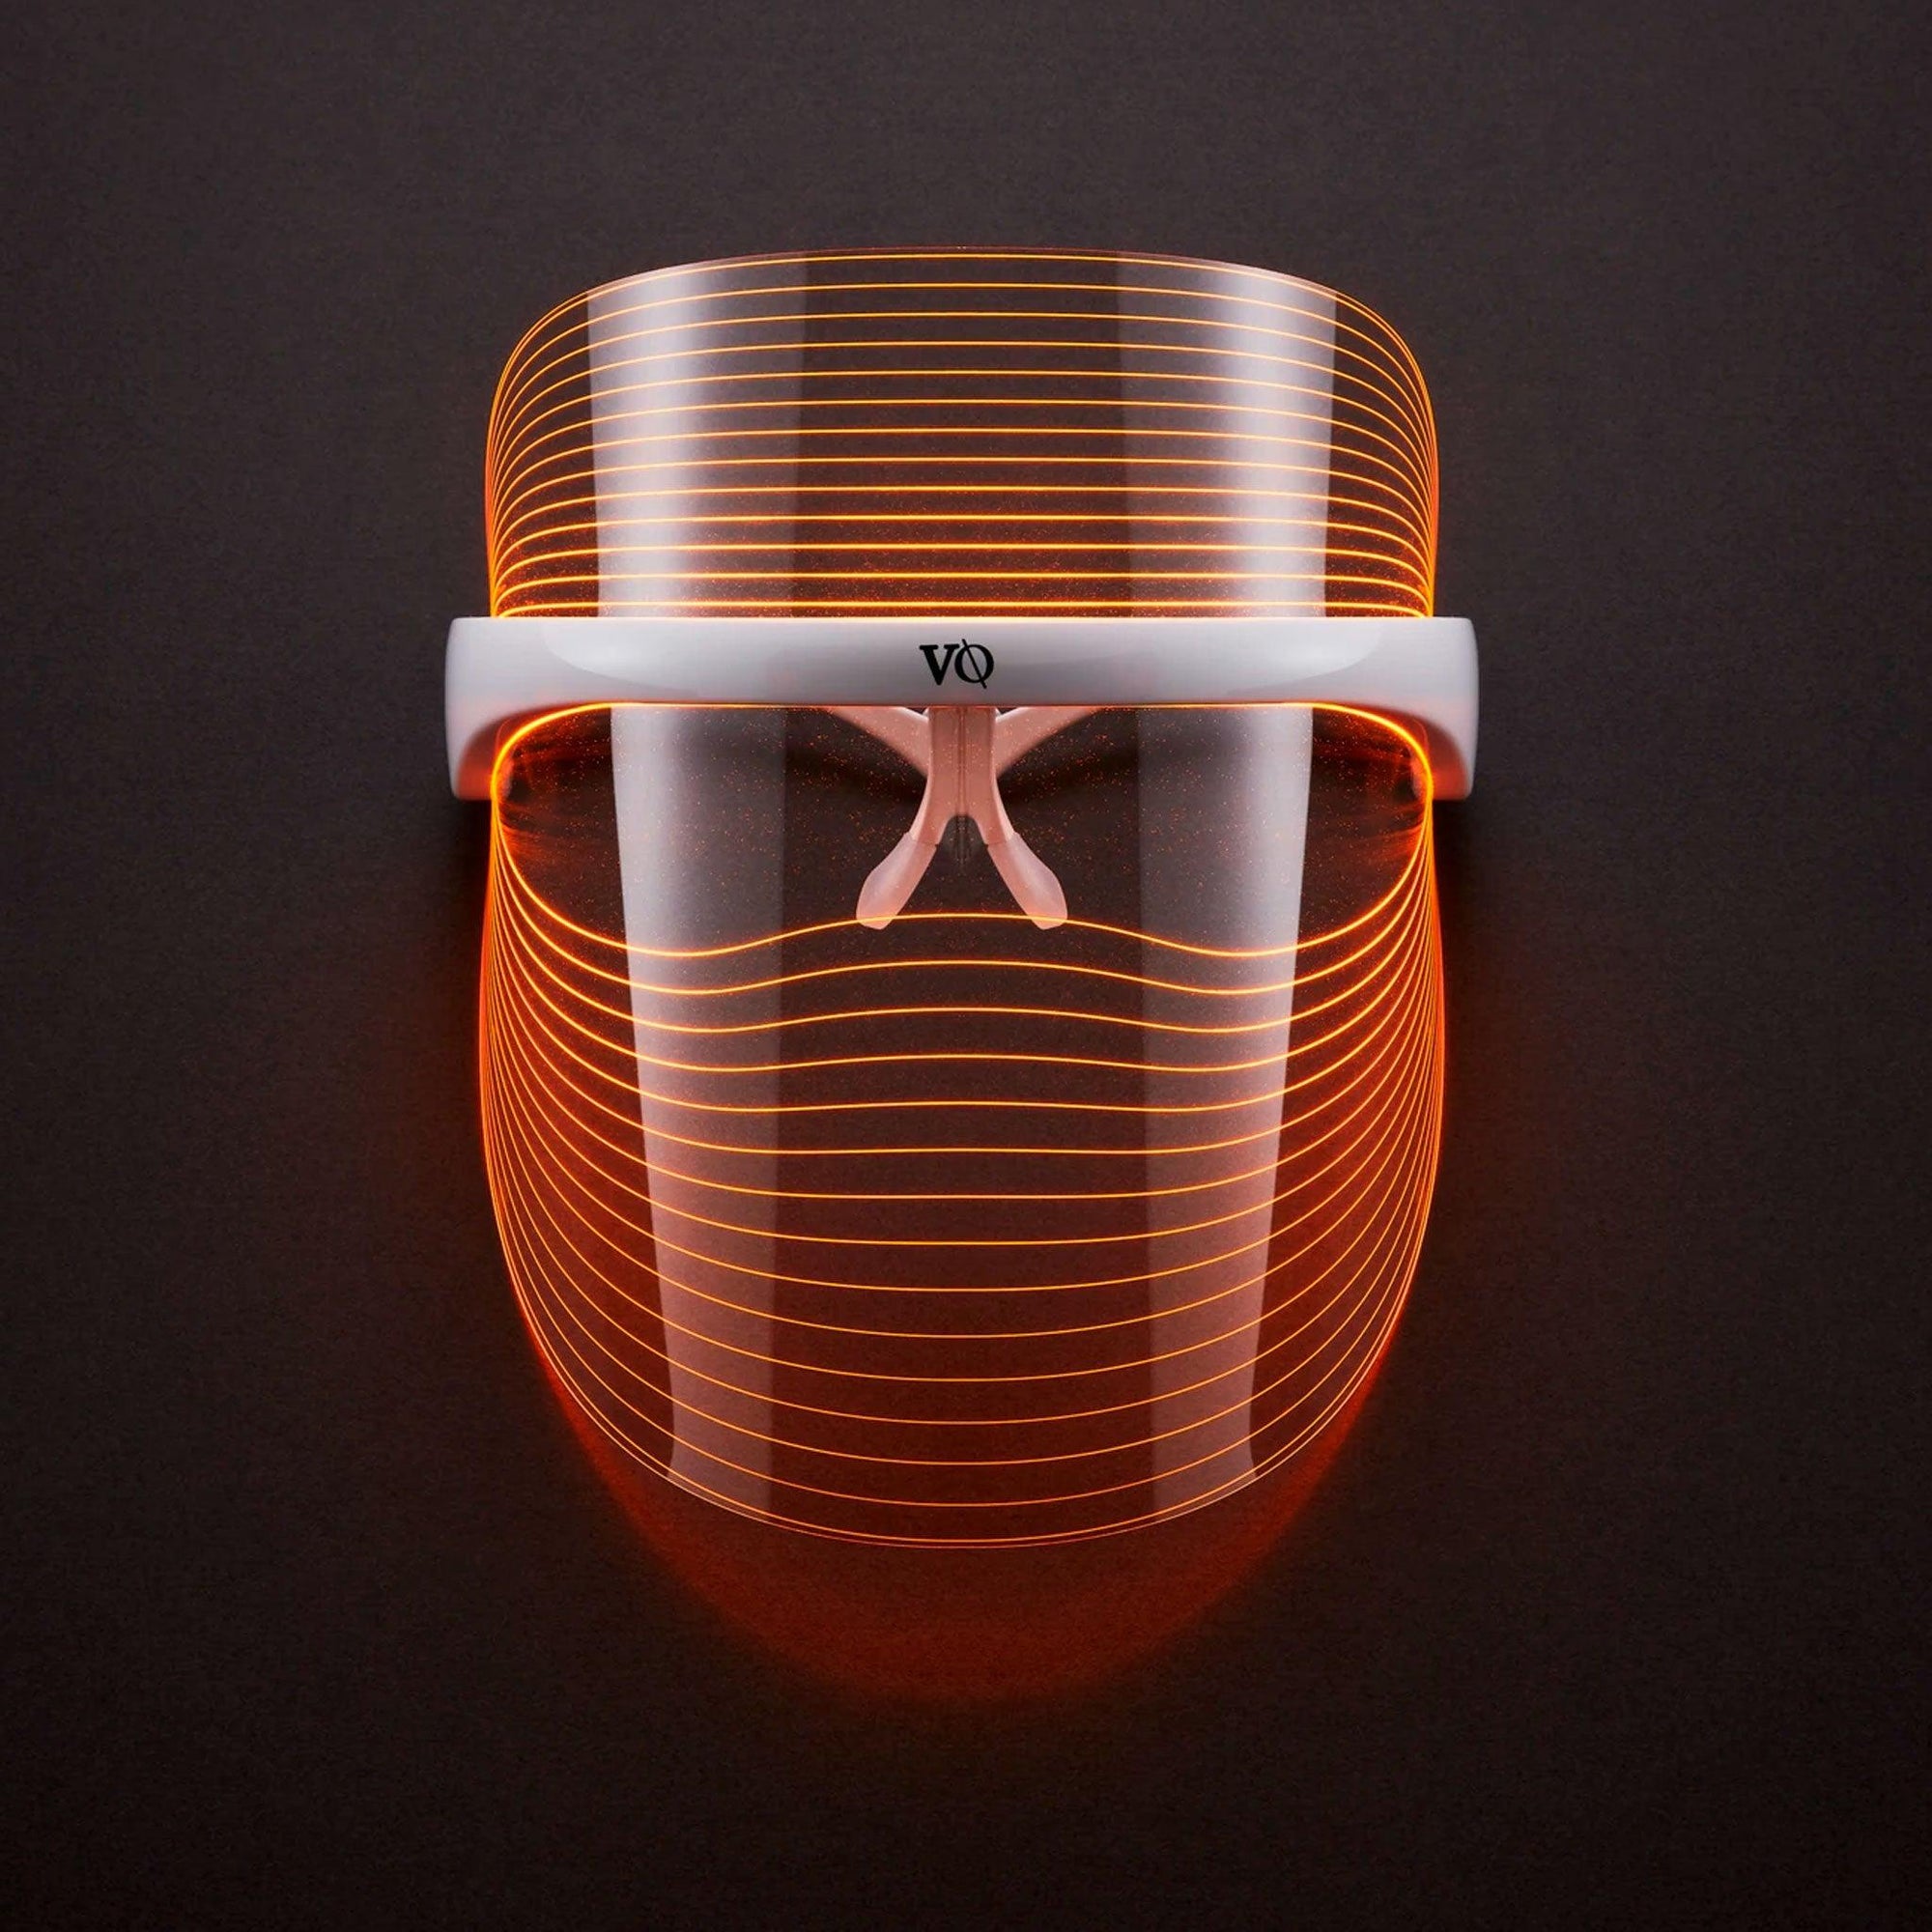 LED Photon Light Therapy Mask - Vitamasques